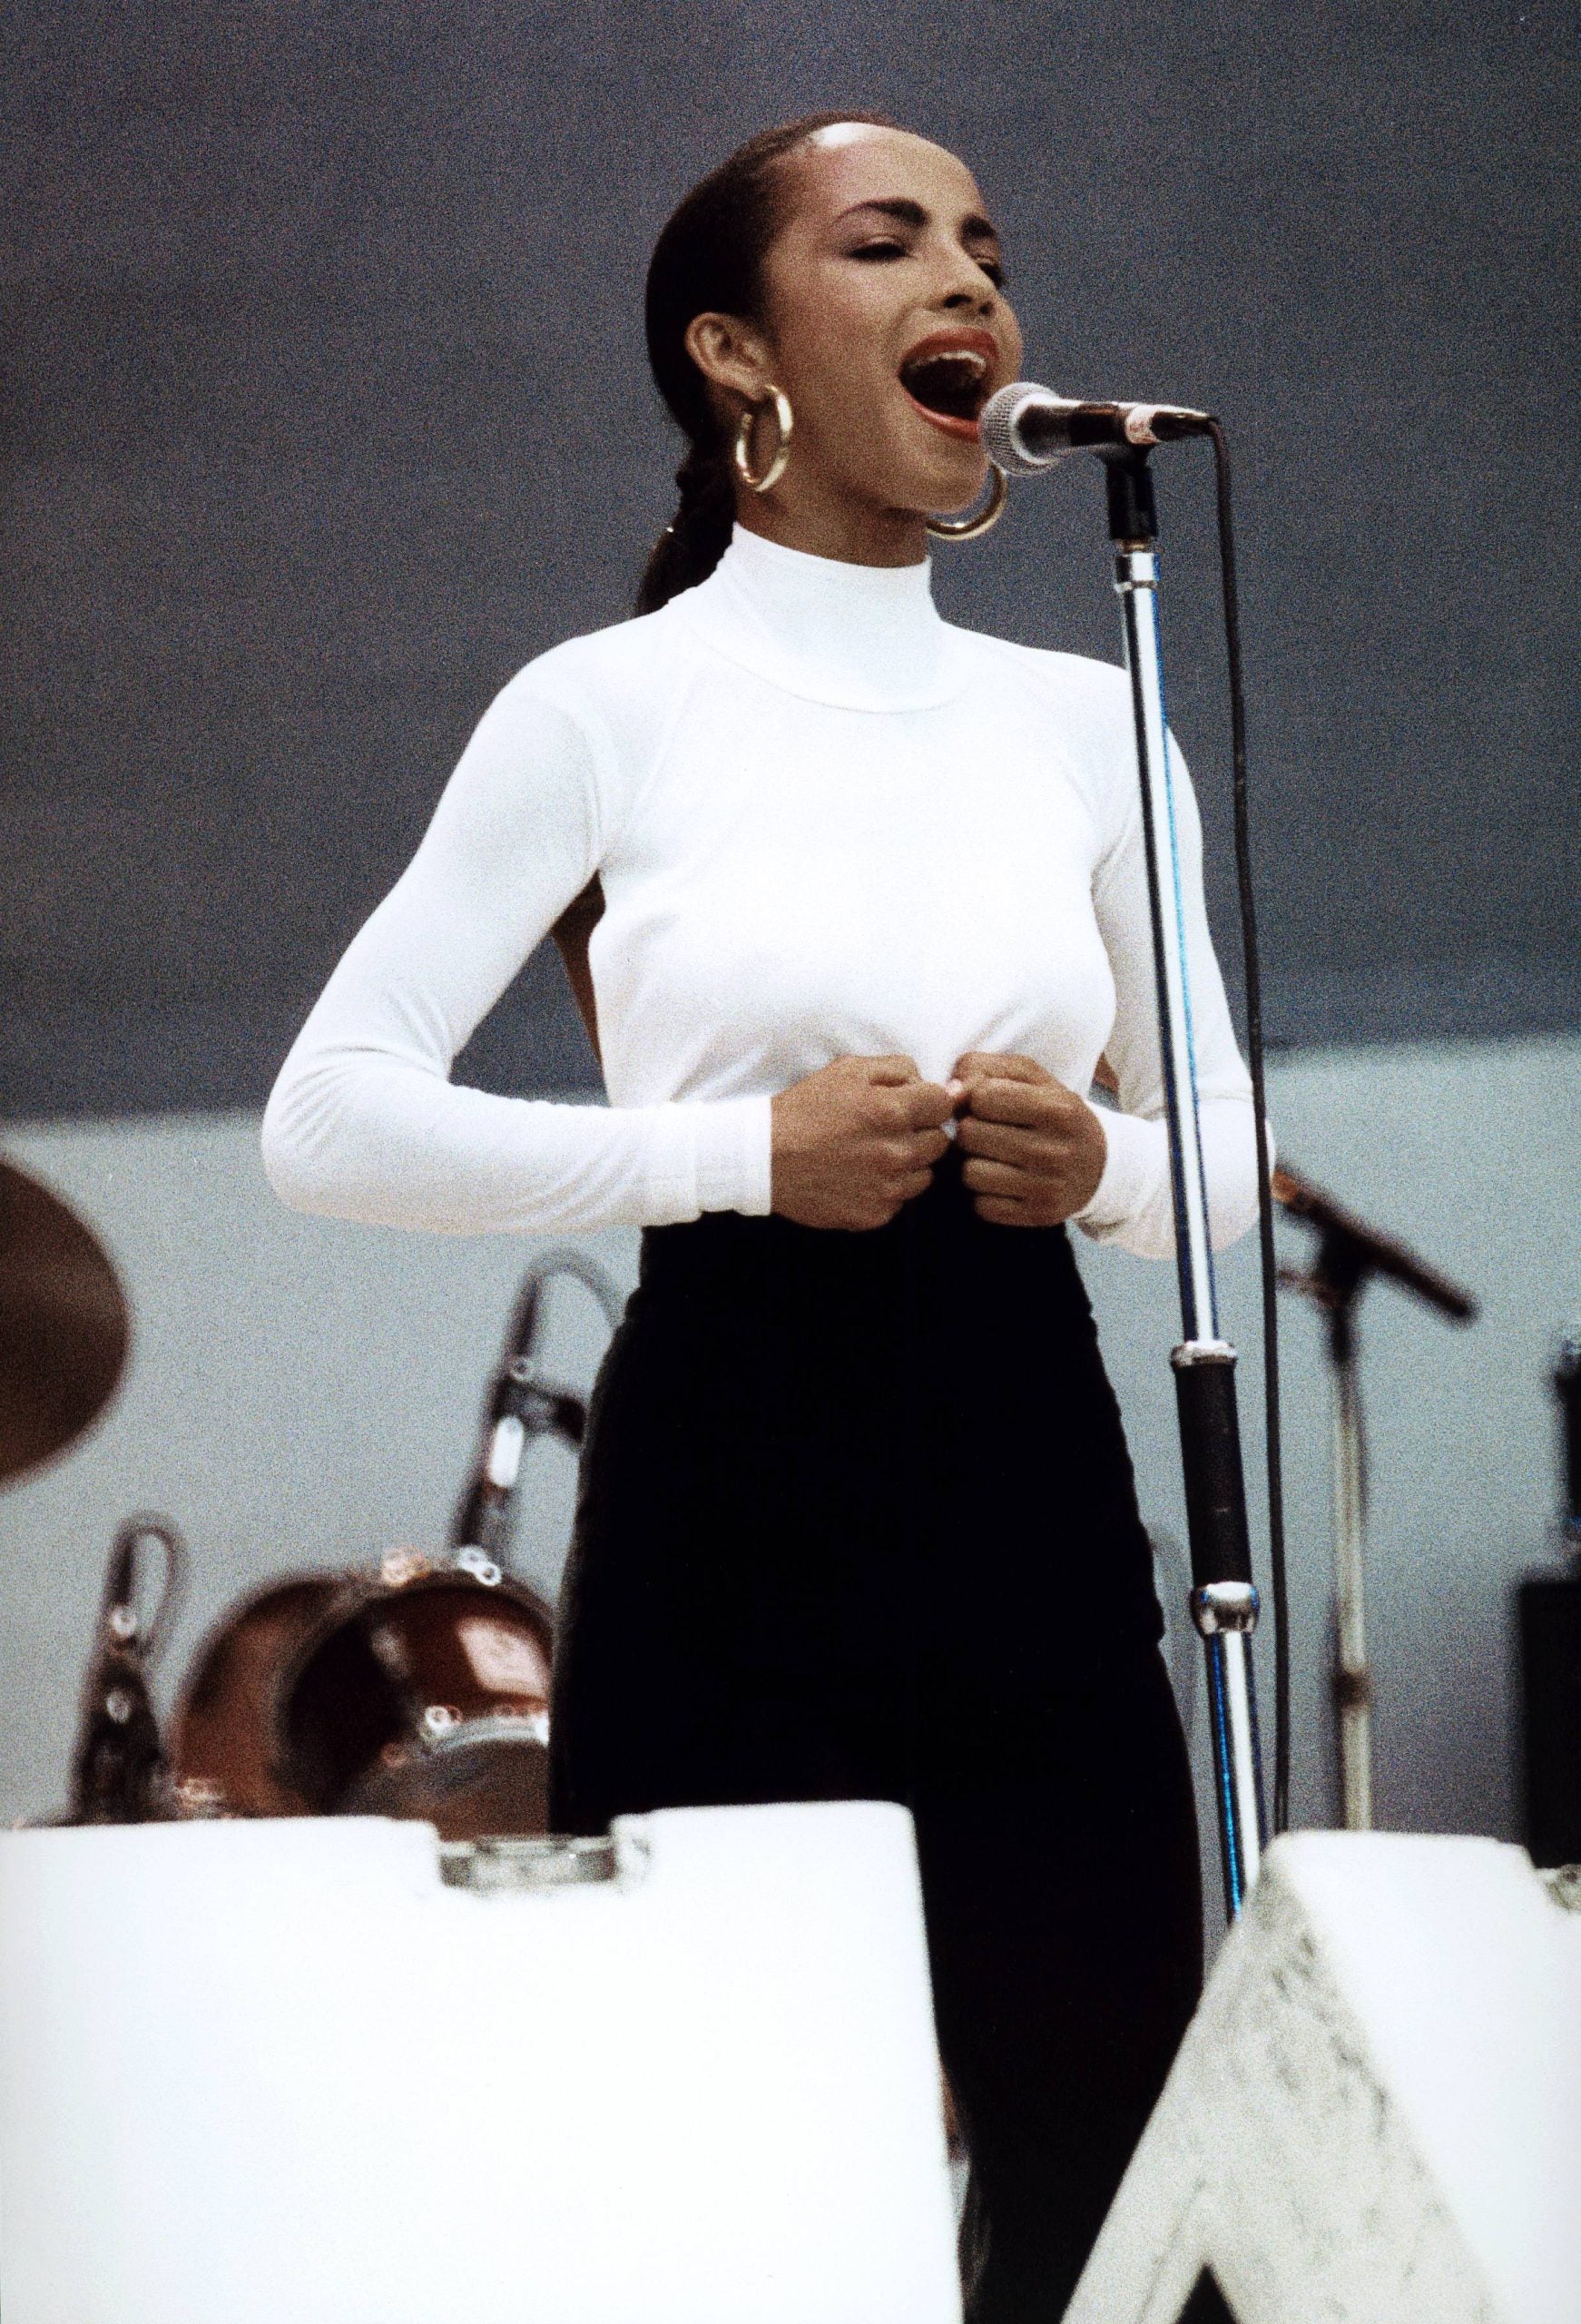 Channeling Nostalgia With This Celebrity Look: Sade